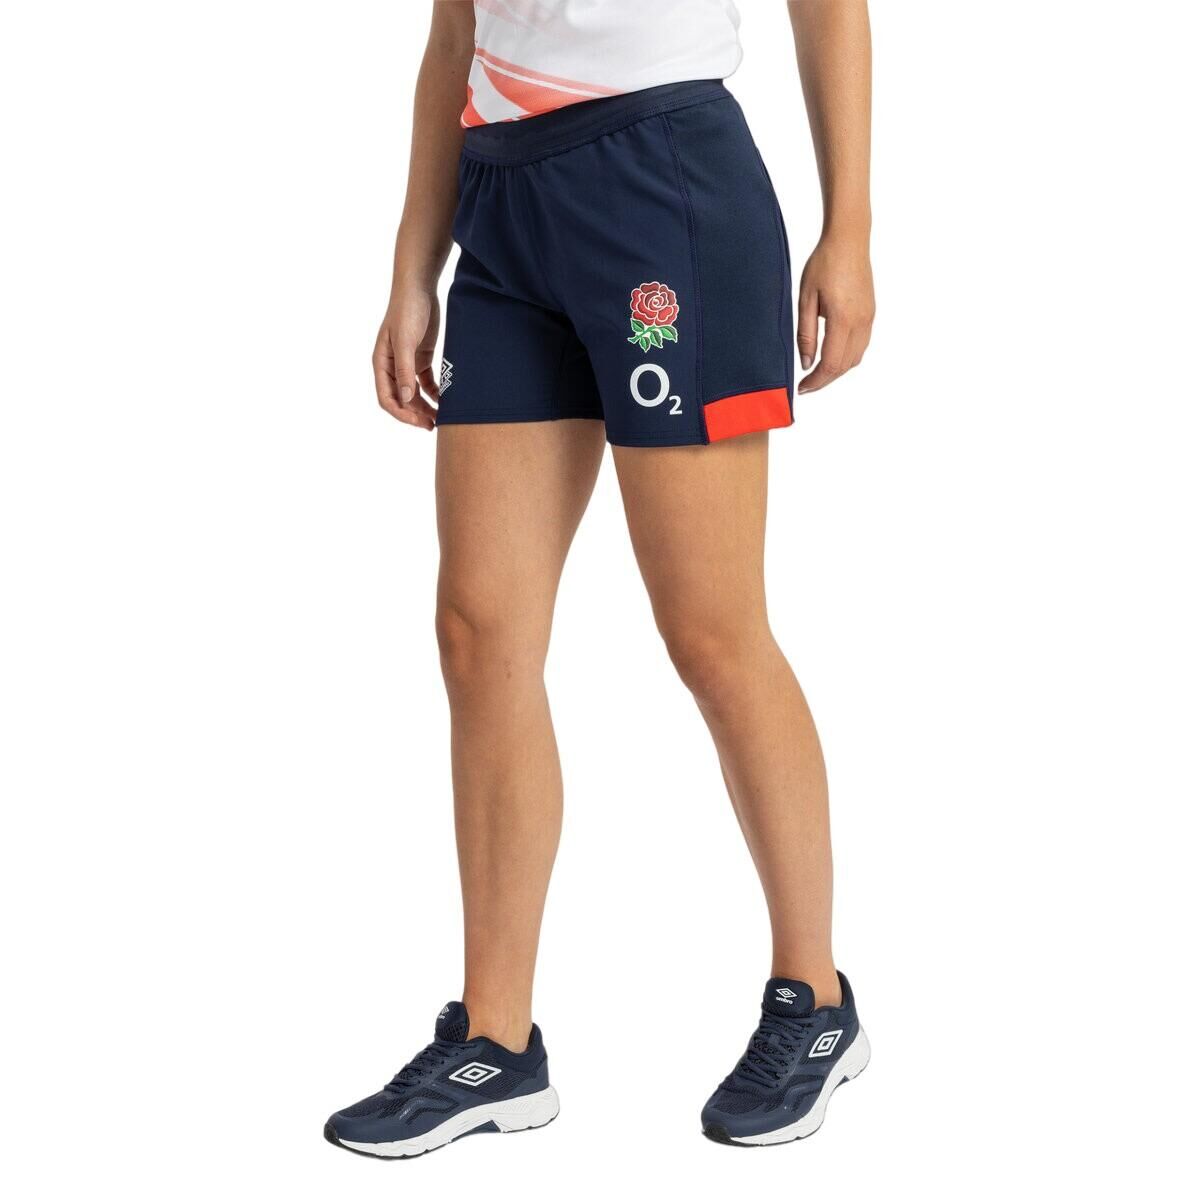 UMBRO Womens/Ladies 23/24 England Rugby Training Contact Shorts (Navy Blazer/Flame